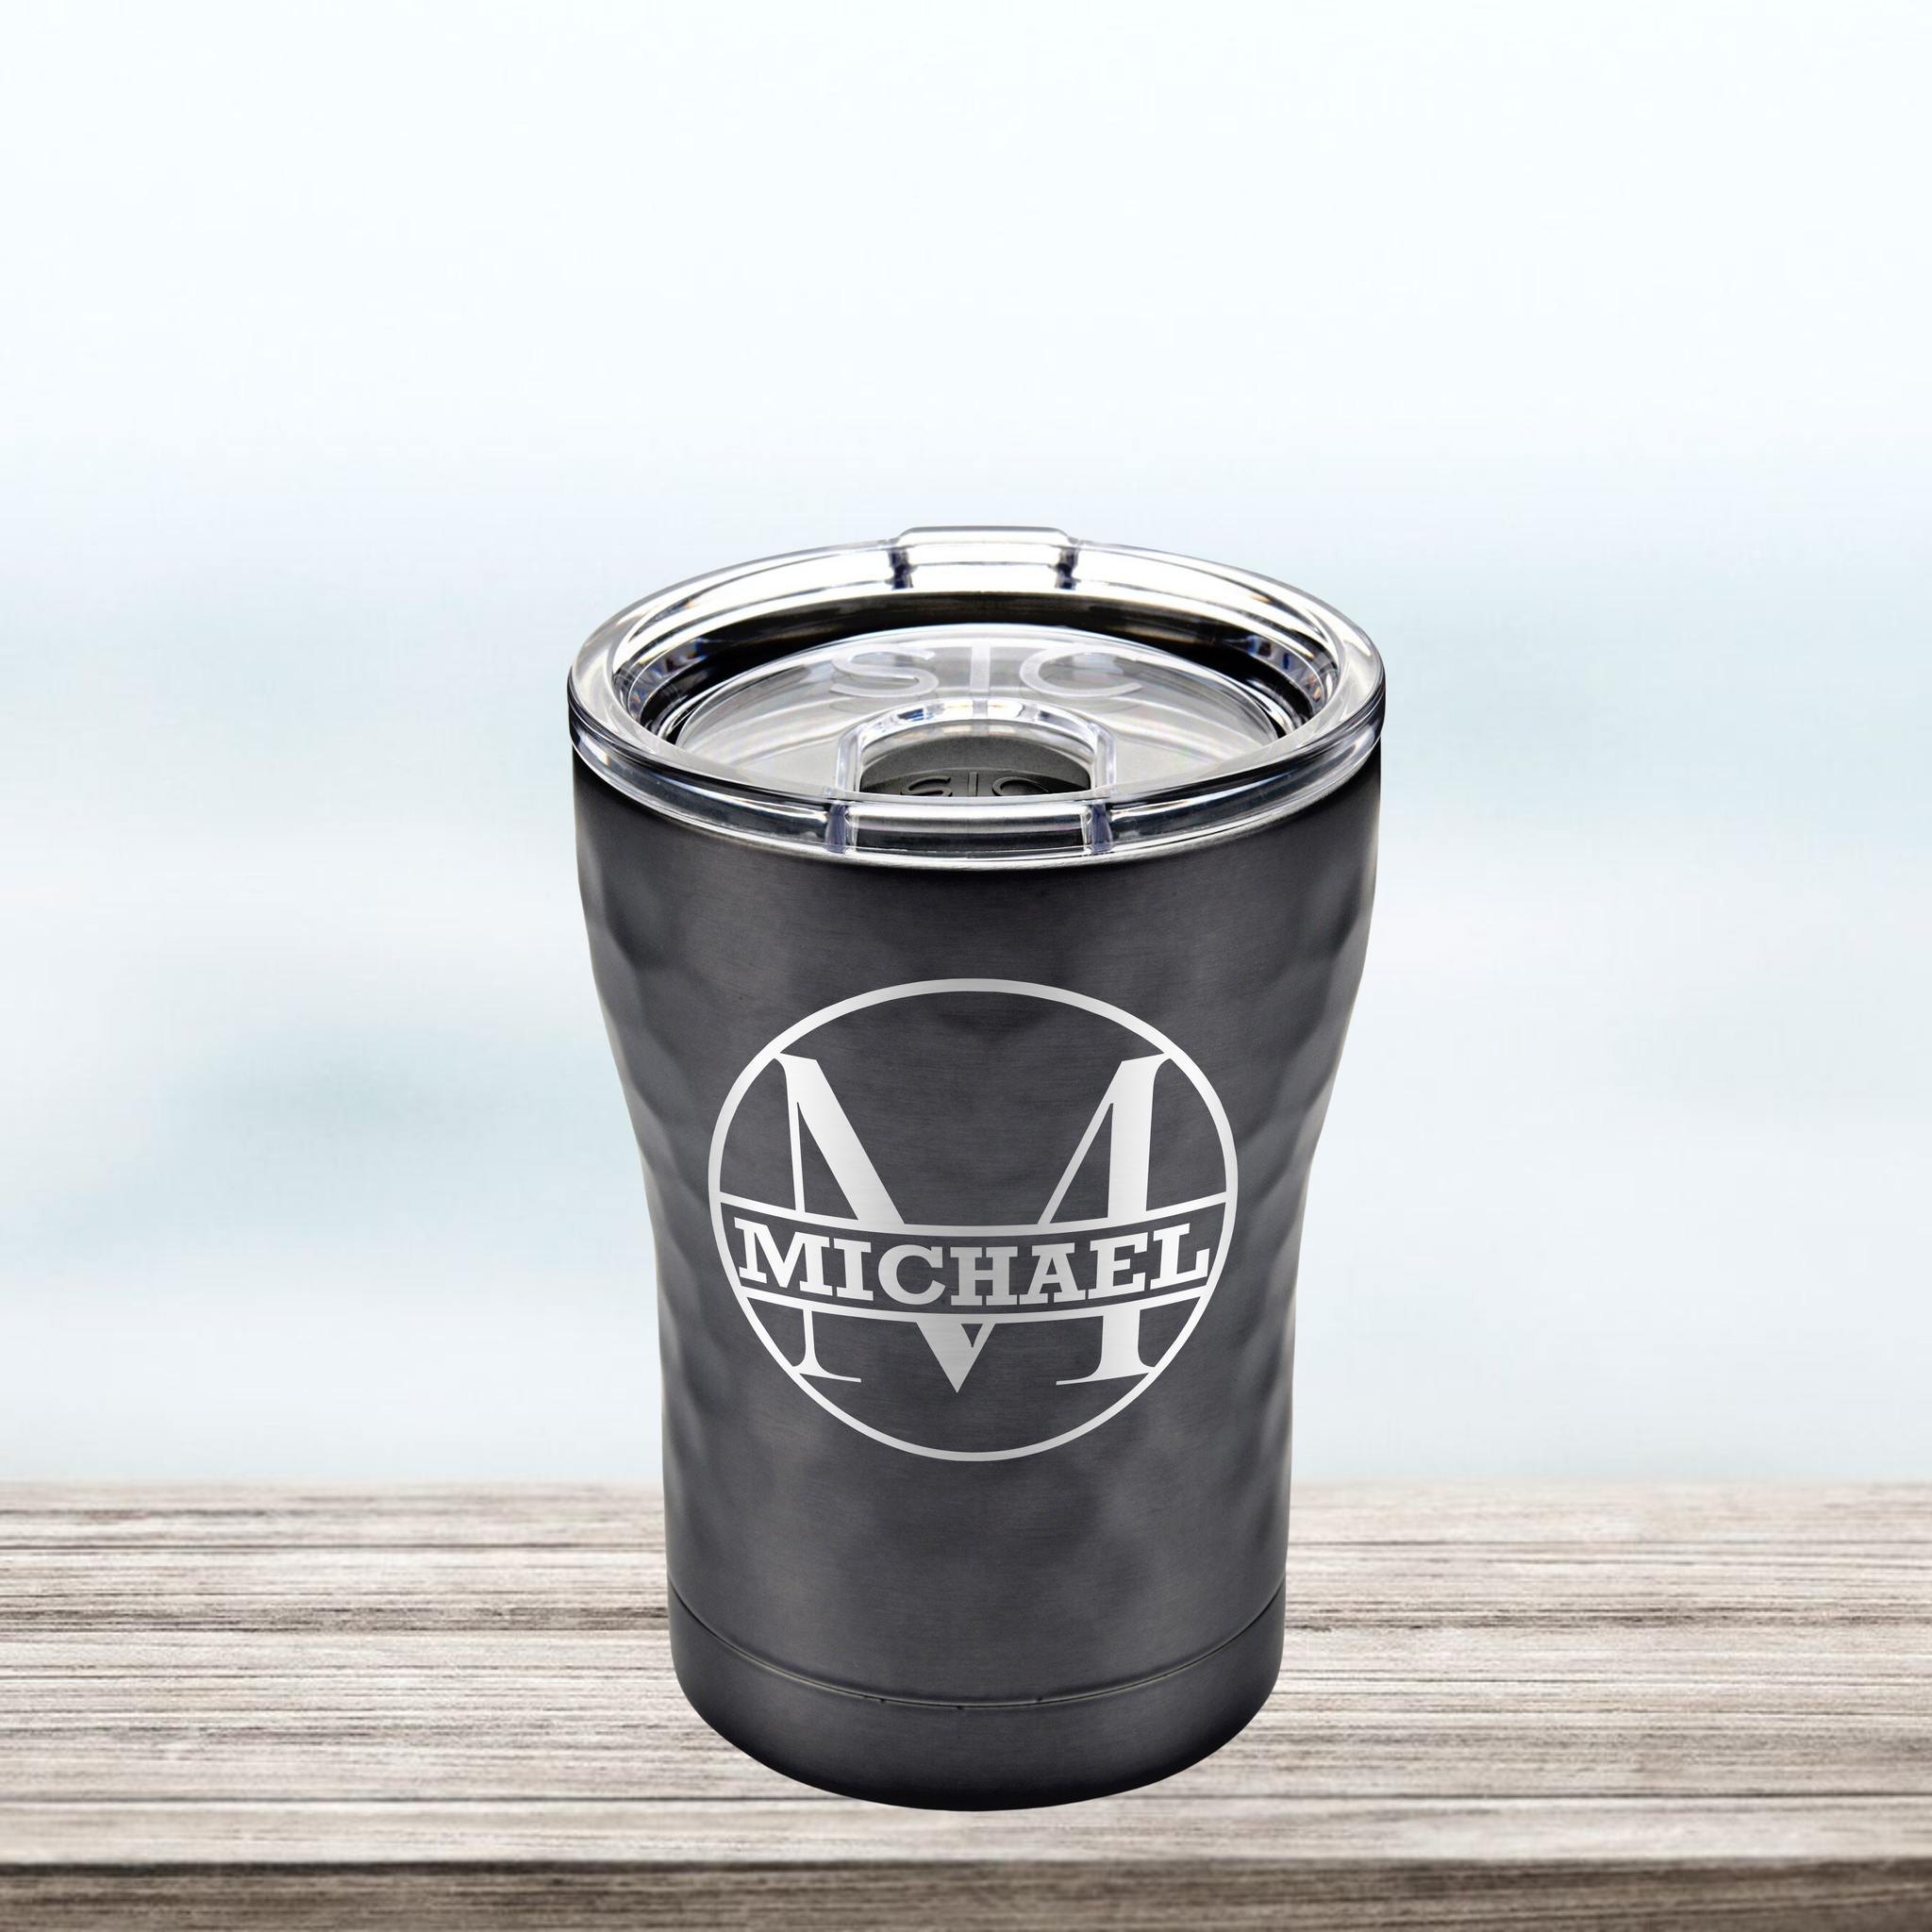 Mr. and Mrs., 12 oz Engraved Tumbler with Lid